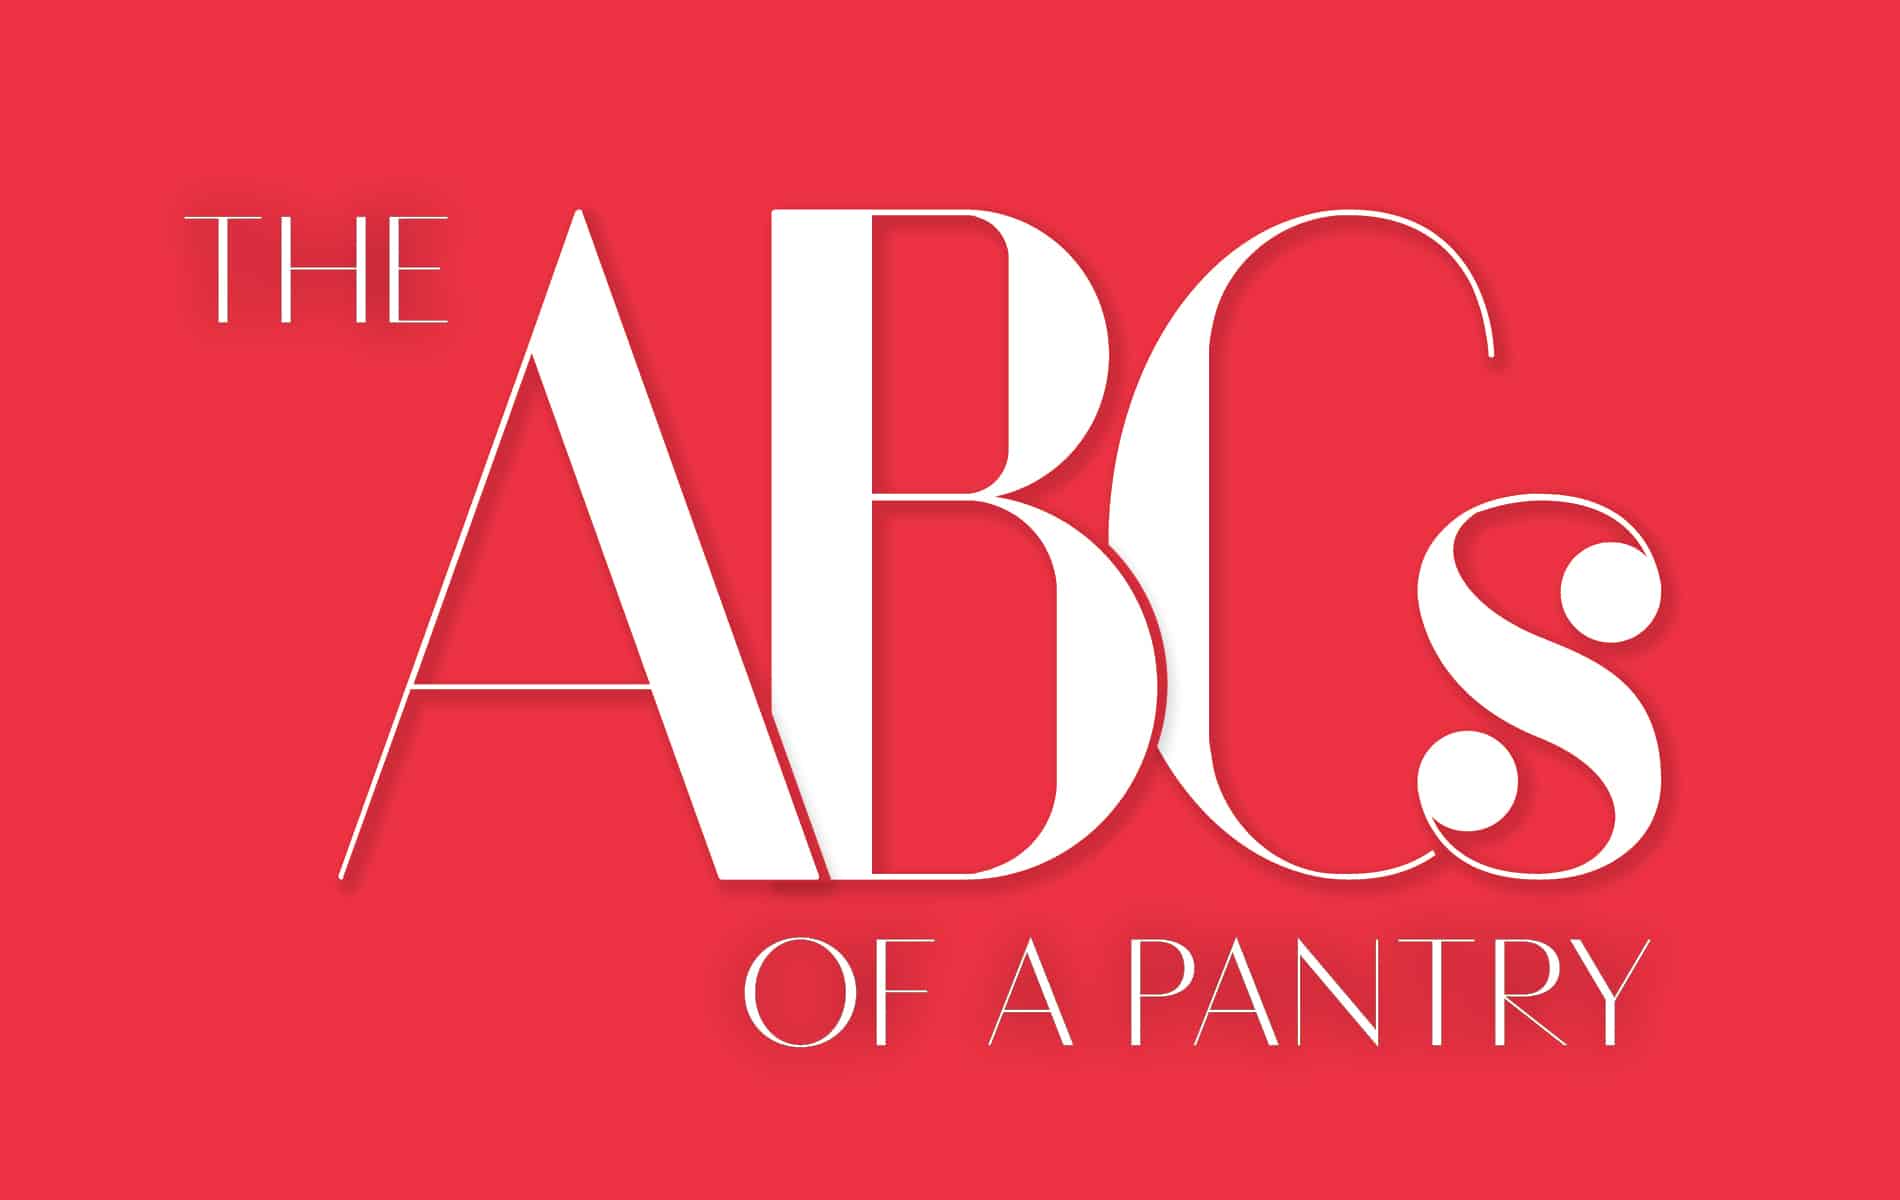 The ABCs of a Pantry